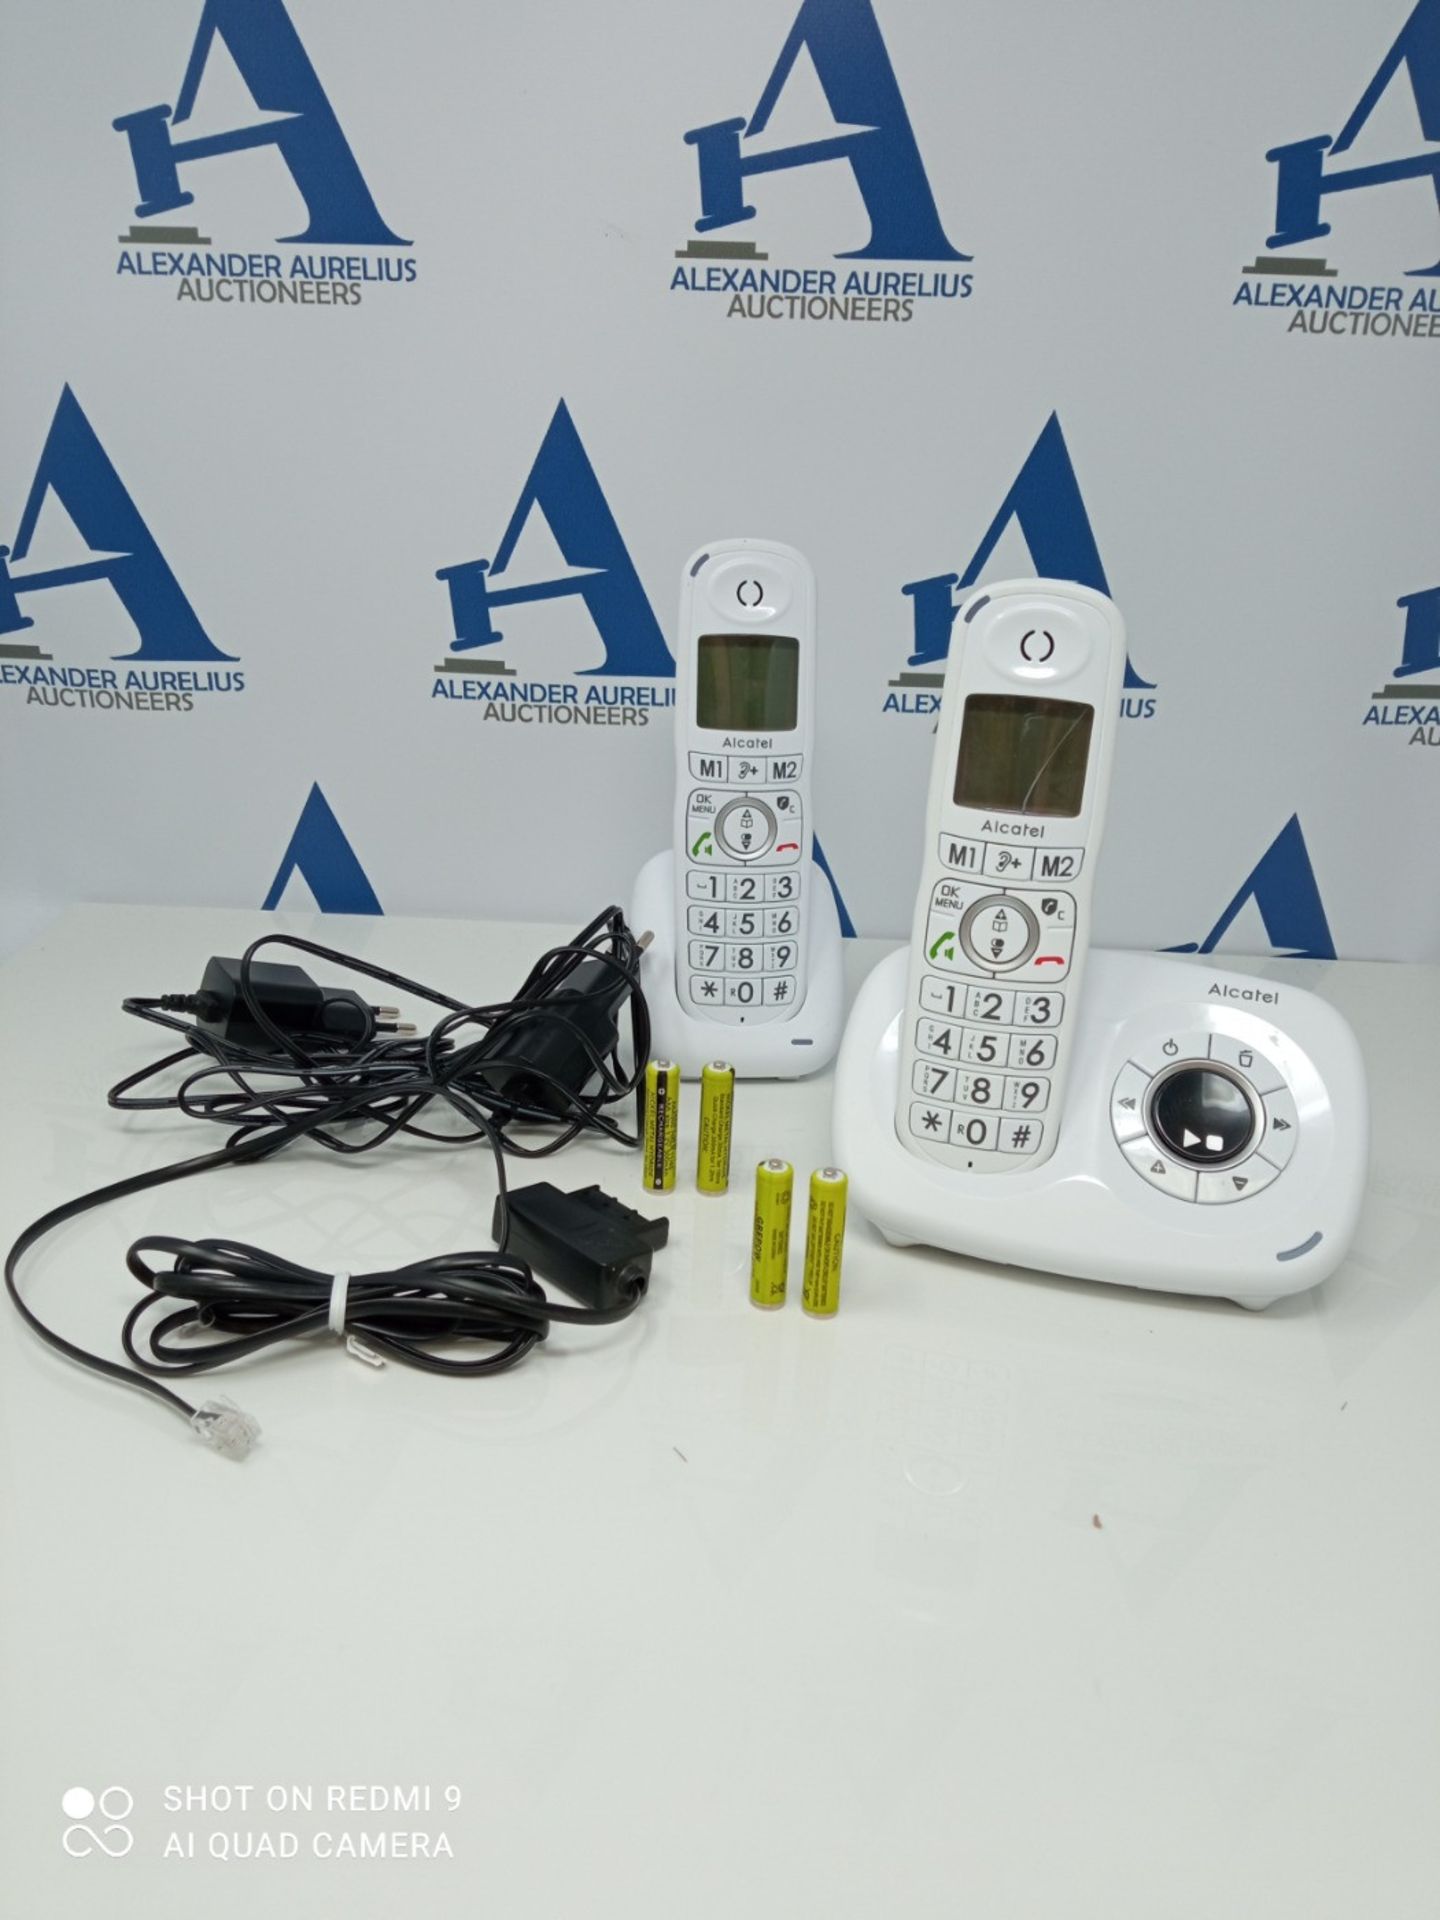 Logicom Confort 255T Dual Cordless Phones with Answering Machine White - Image 3 of 3